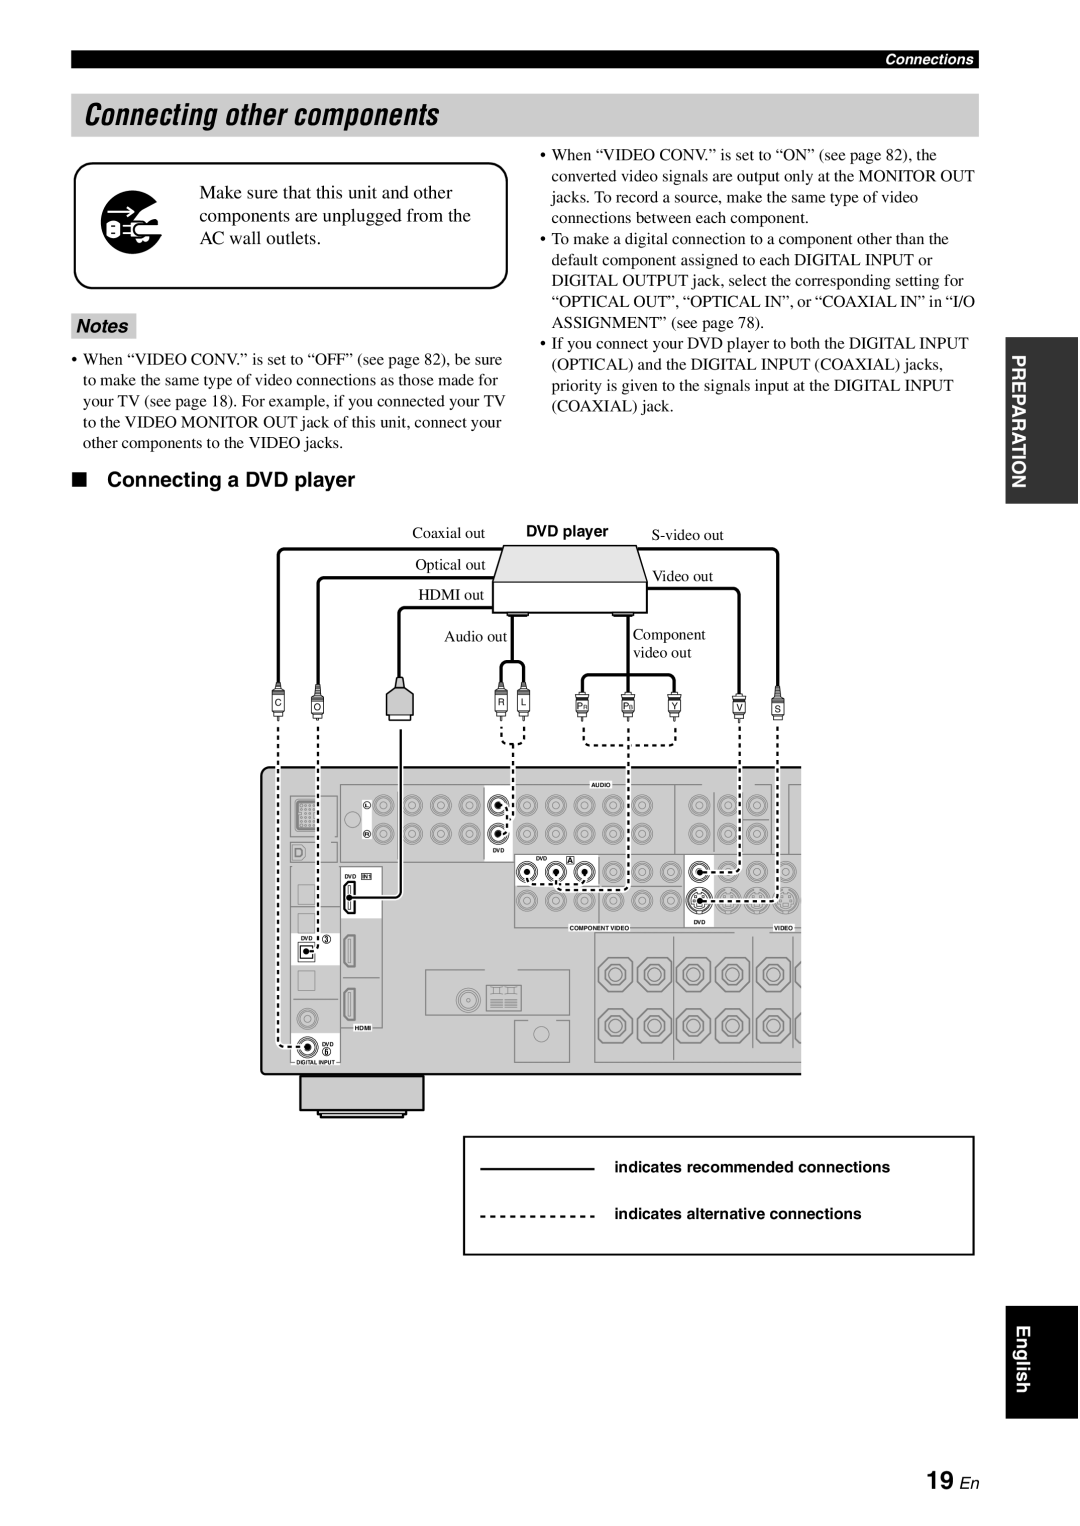 Yamaha HTR-6080 owner manual Connecting other components, 19 En, Connecting a DVD player, Notes 